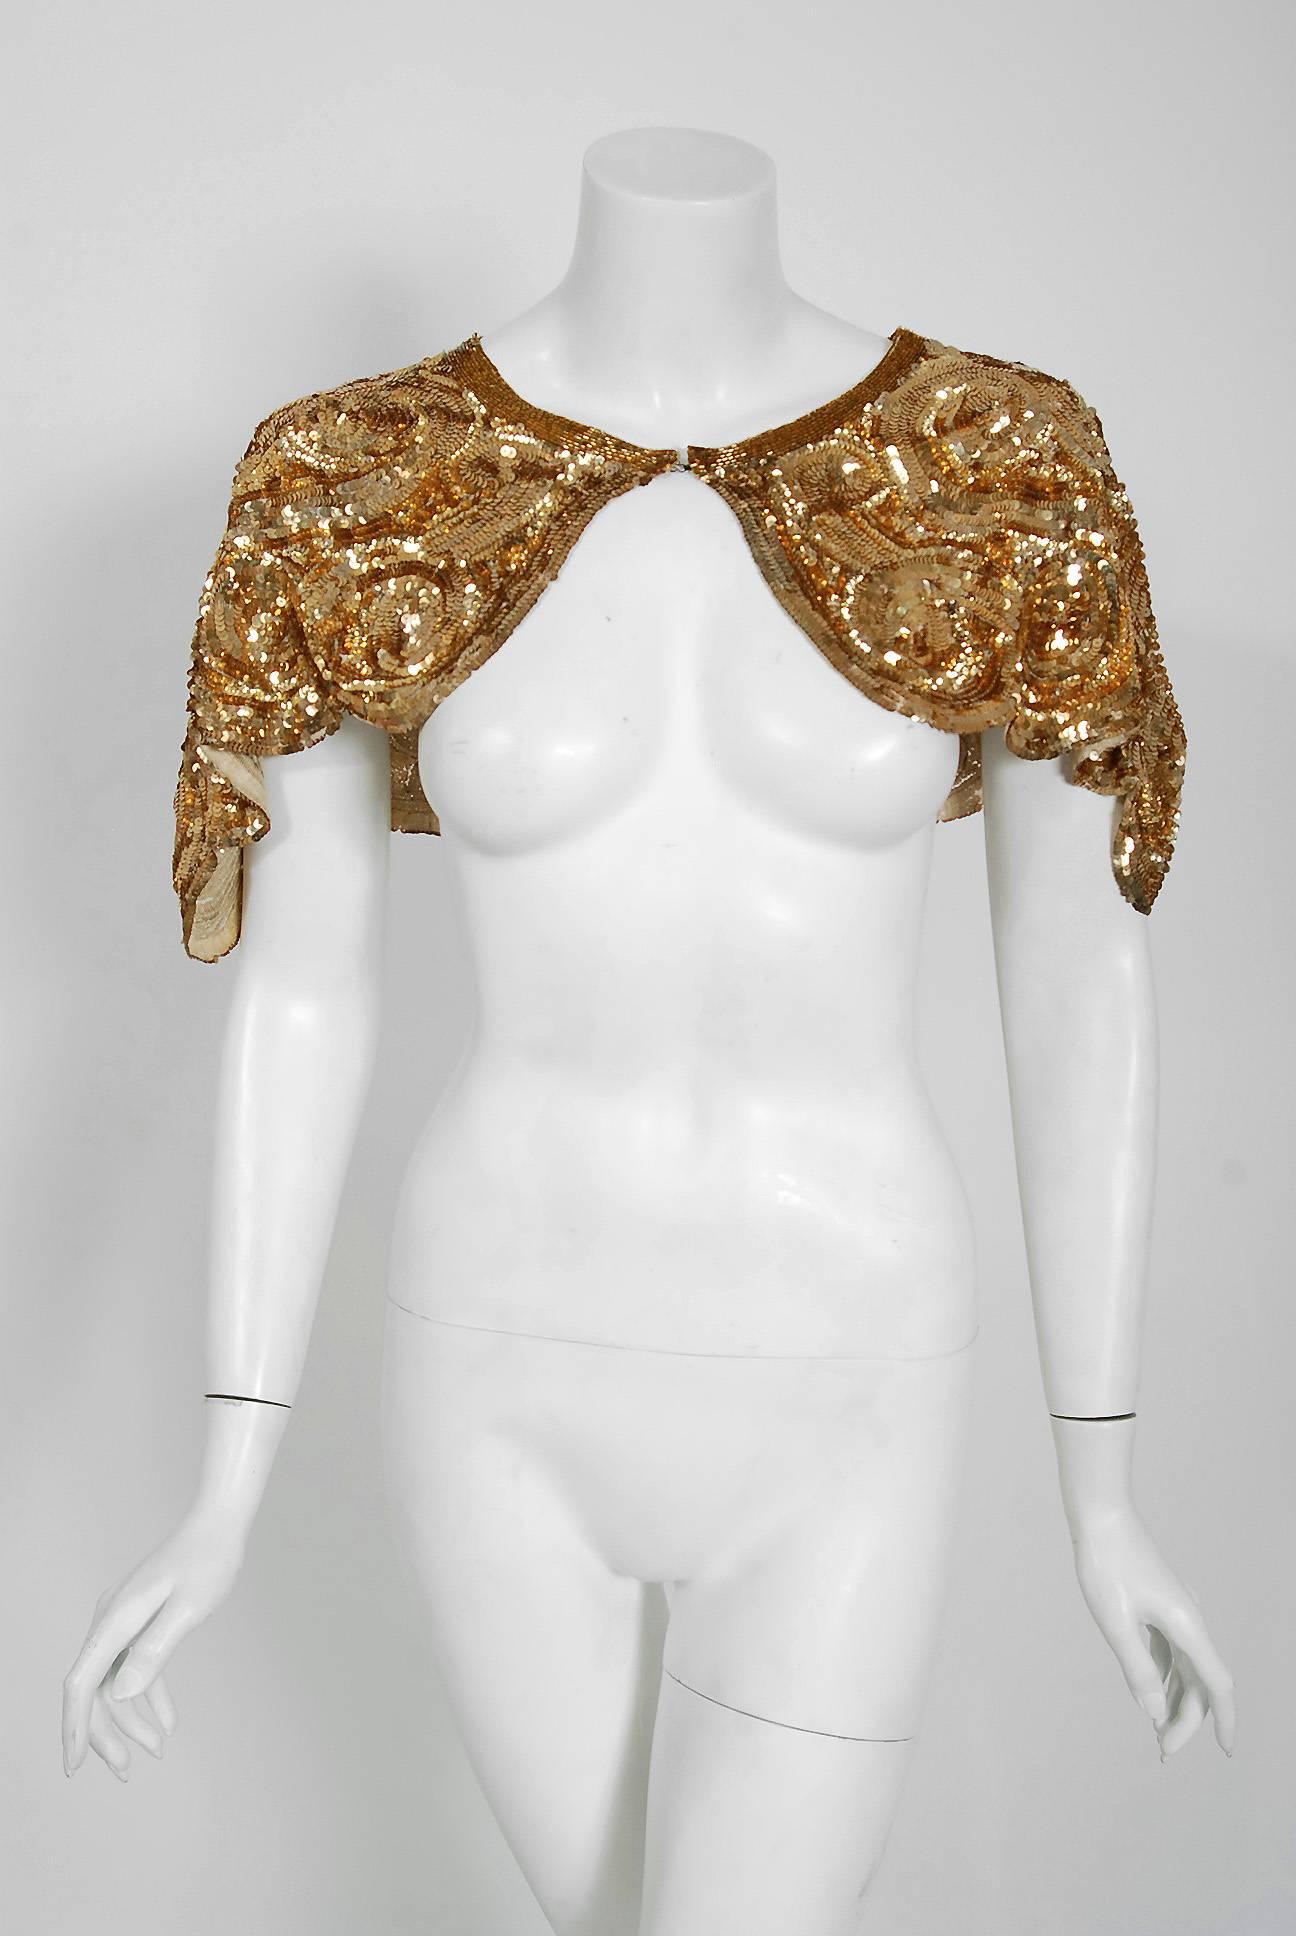 Breathtaking French Couture metallic-gold sequin scalloped capelet dating back to the mid 1920's. Evening capes from the Art-Deco era remain a perennial favorite, perhaps because no other period combined such opulence with youthful sass. The casual,